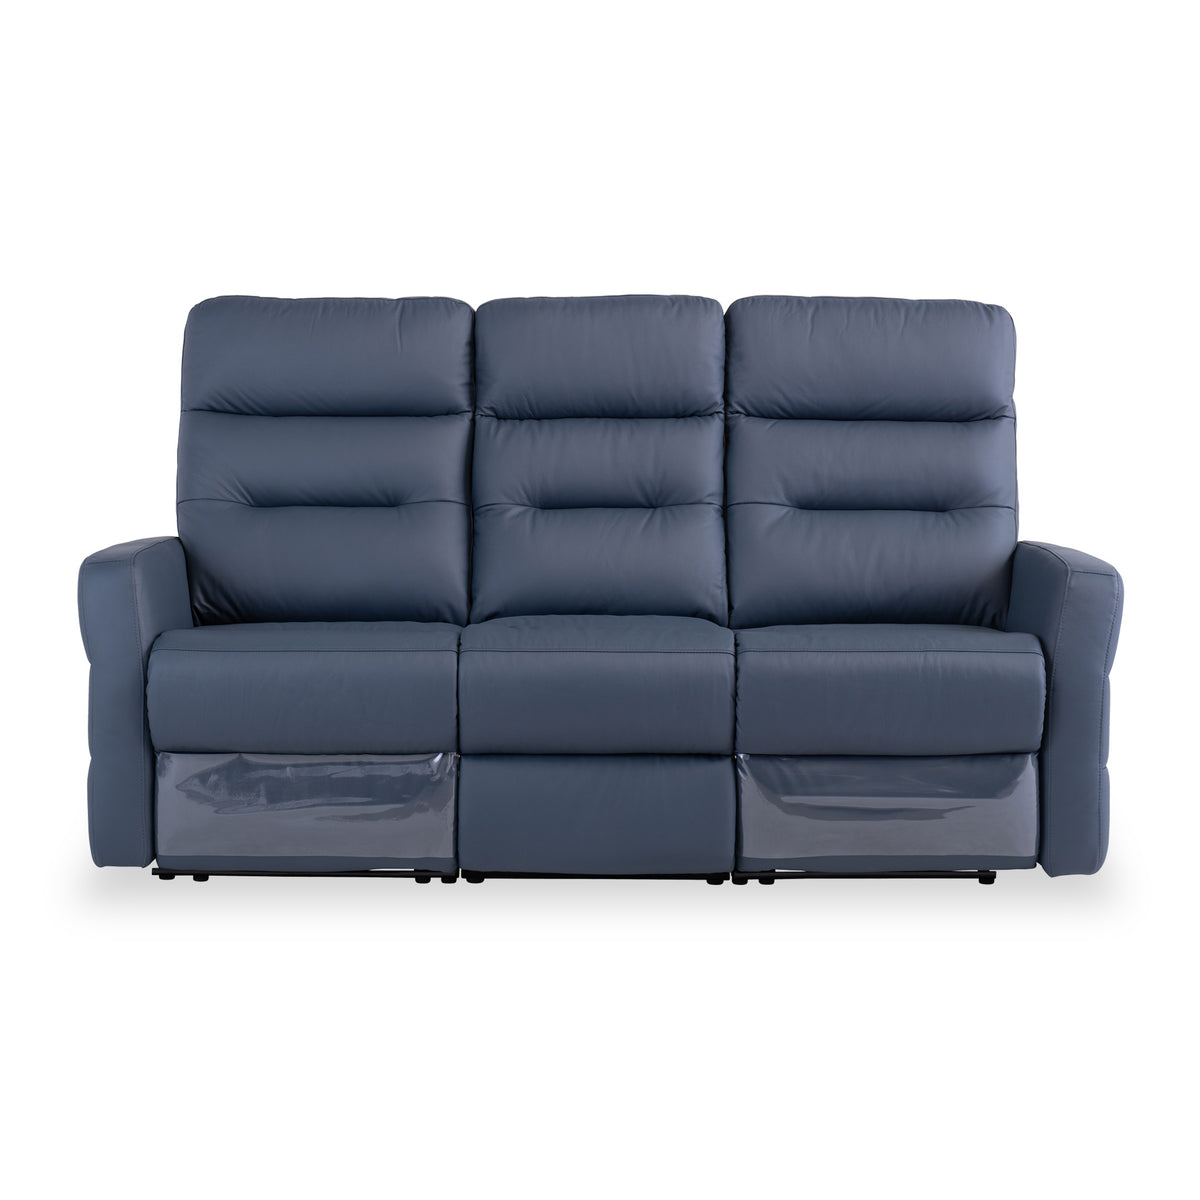 Harlem Blue Leather Electric Reclining 3 Seater Sofa from Roseland Furniture